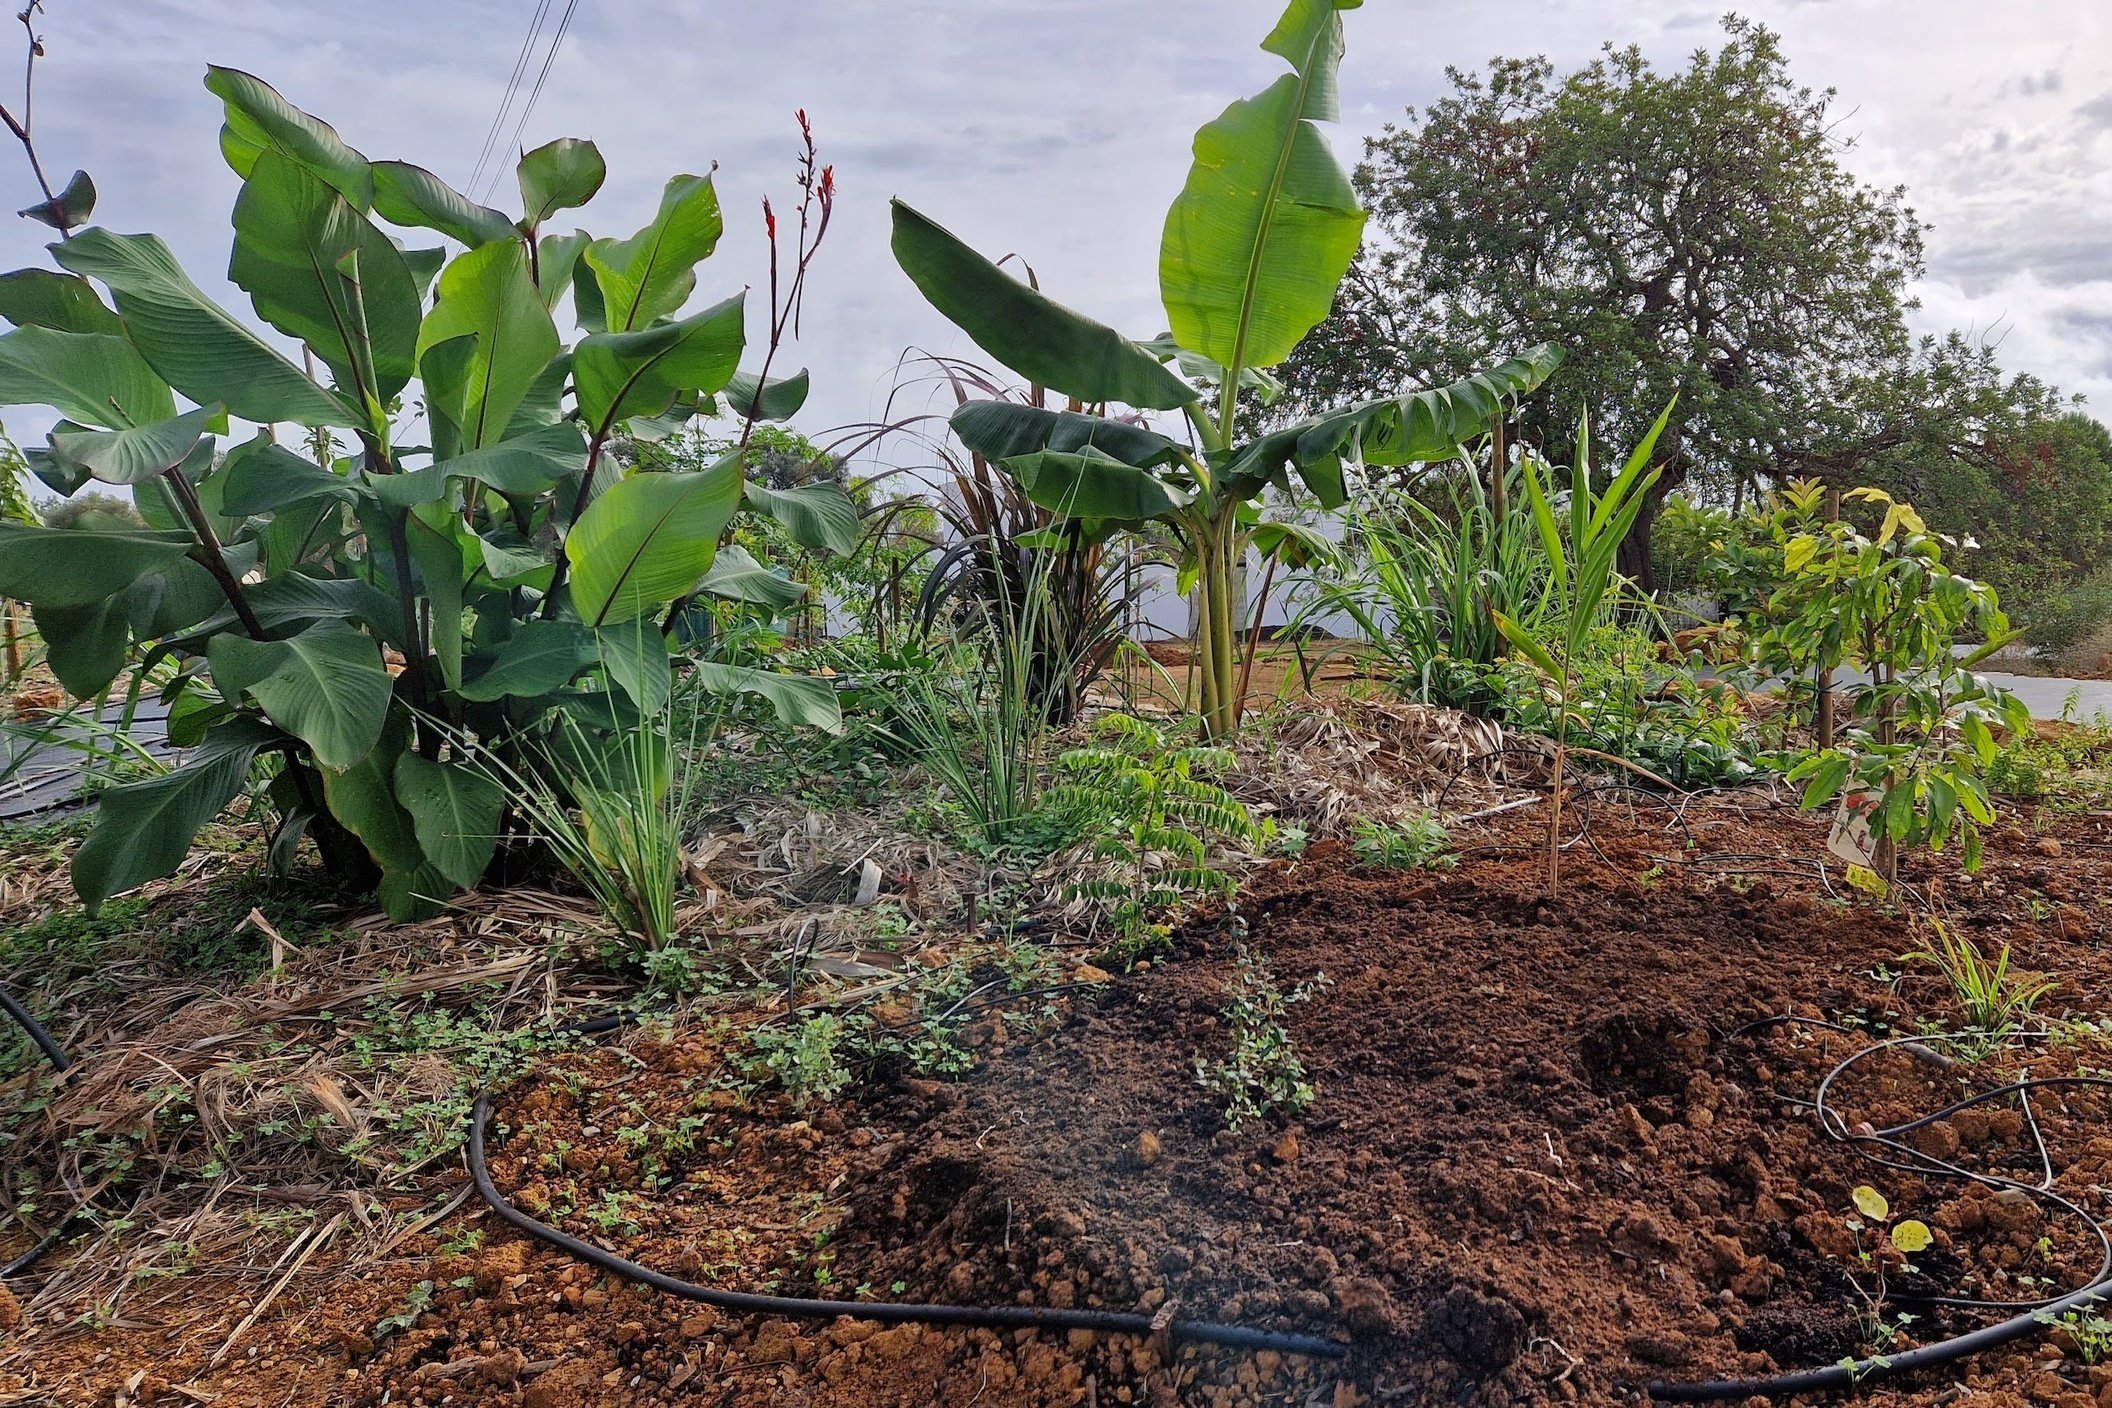 The Mini Edible Jungle side 3 months after planting, with lush Canna edulis and Musa